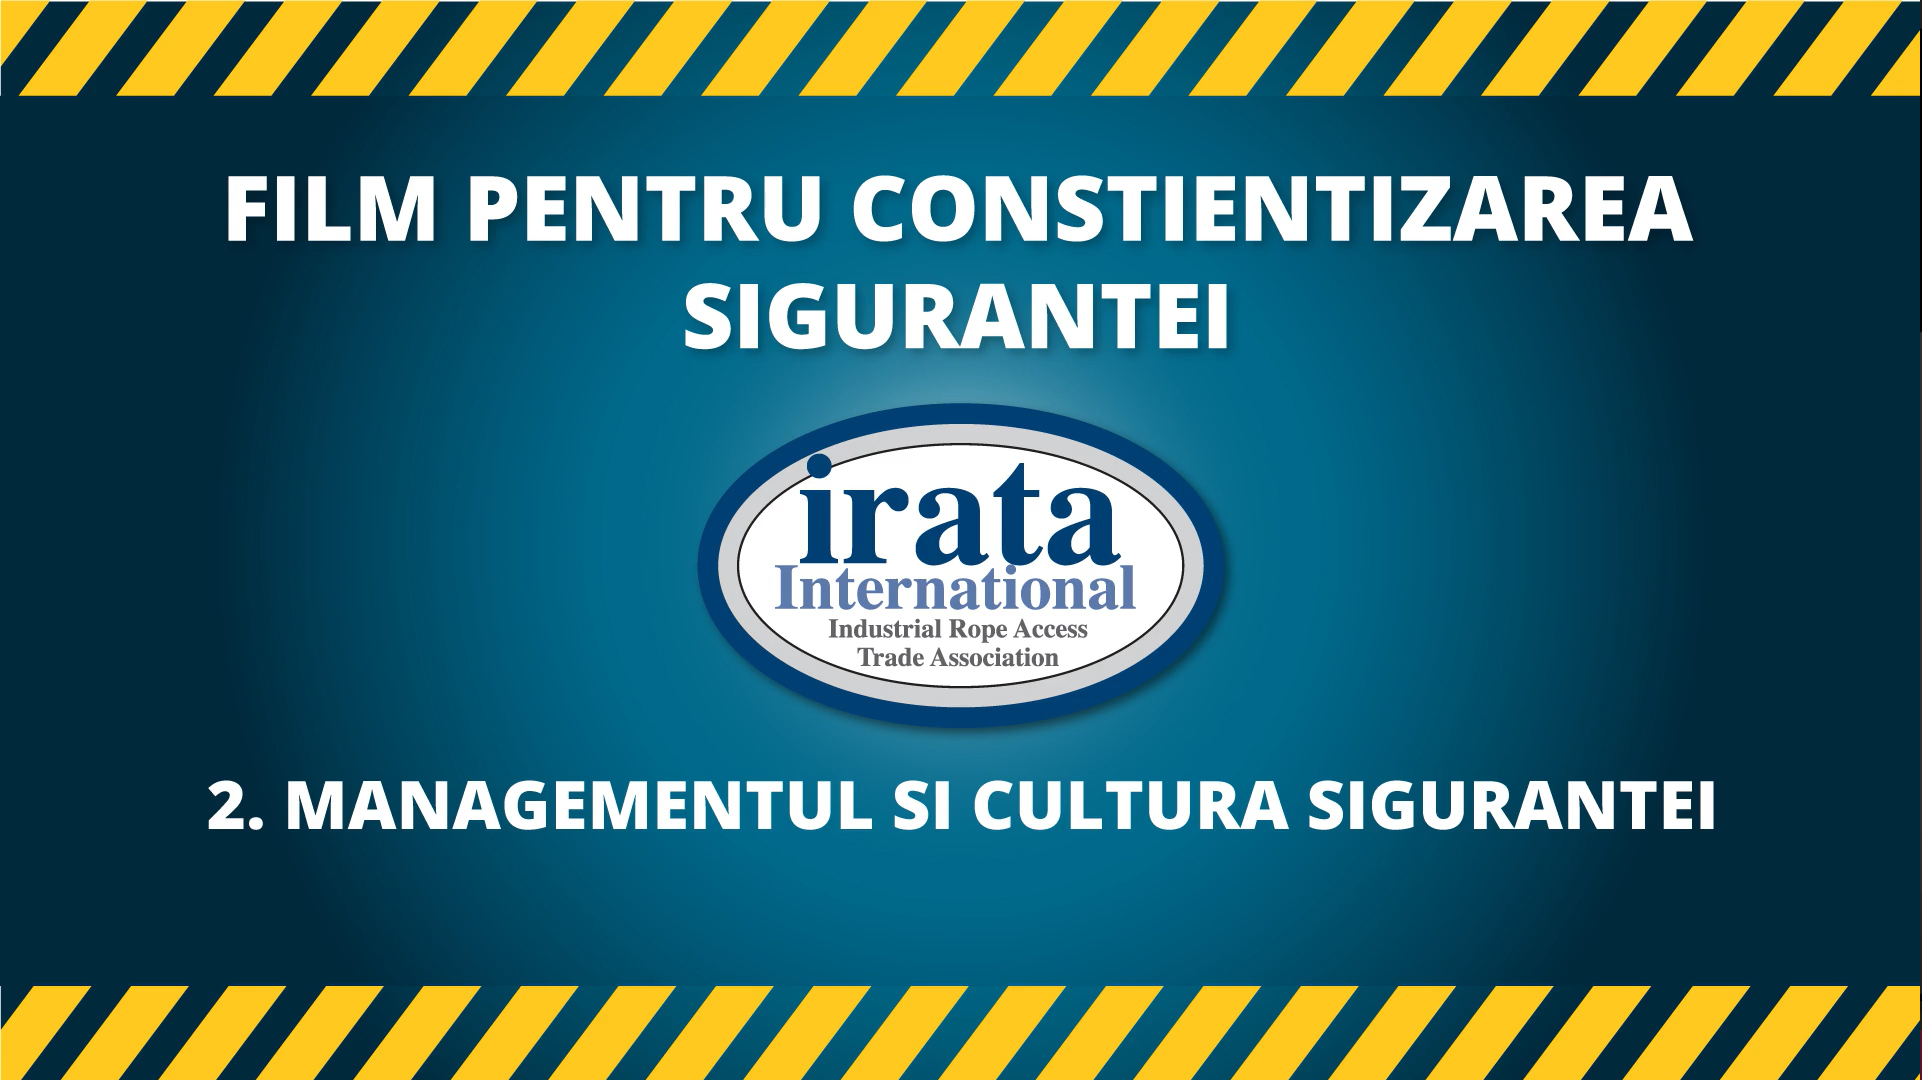 SAFETY AWARENESS VIDEO - management and safety culture - Romanian SUBTITLES